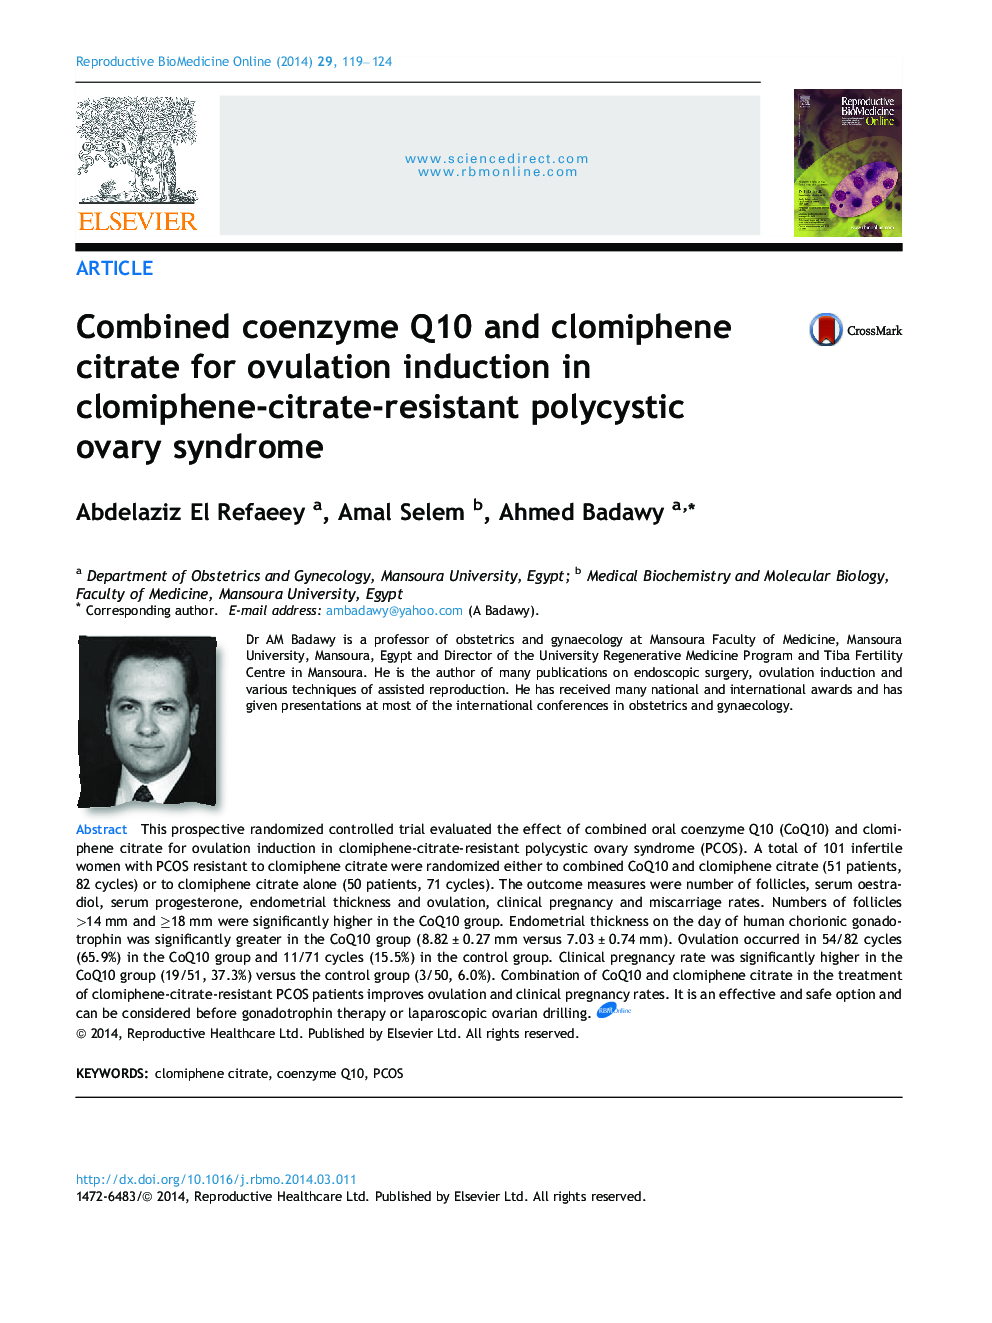 Combined coenzyme Q10 and clomiphene citrate for ovulation induction in clomiphene-citrate-resistant polycystic ovary syndrome 